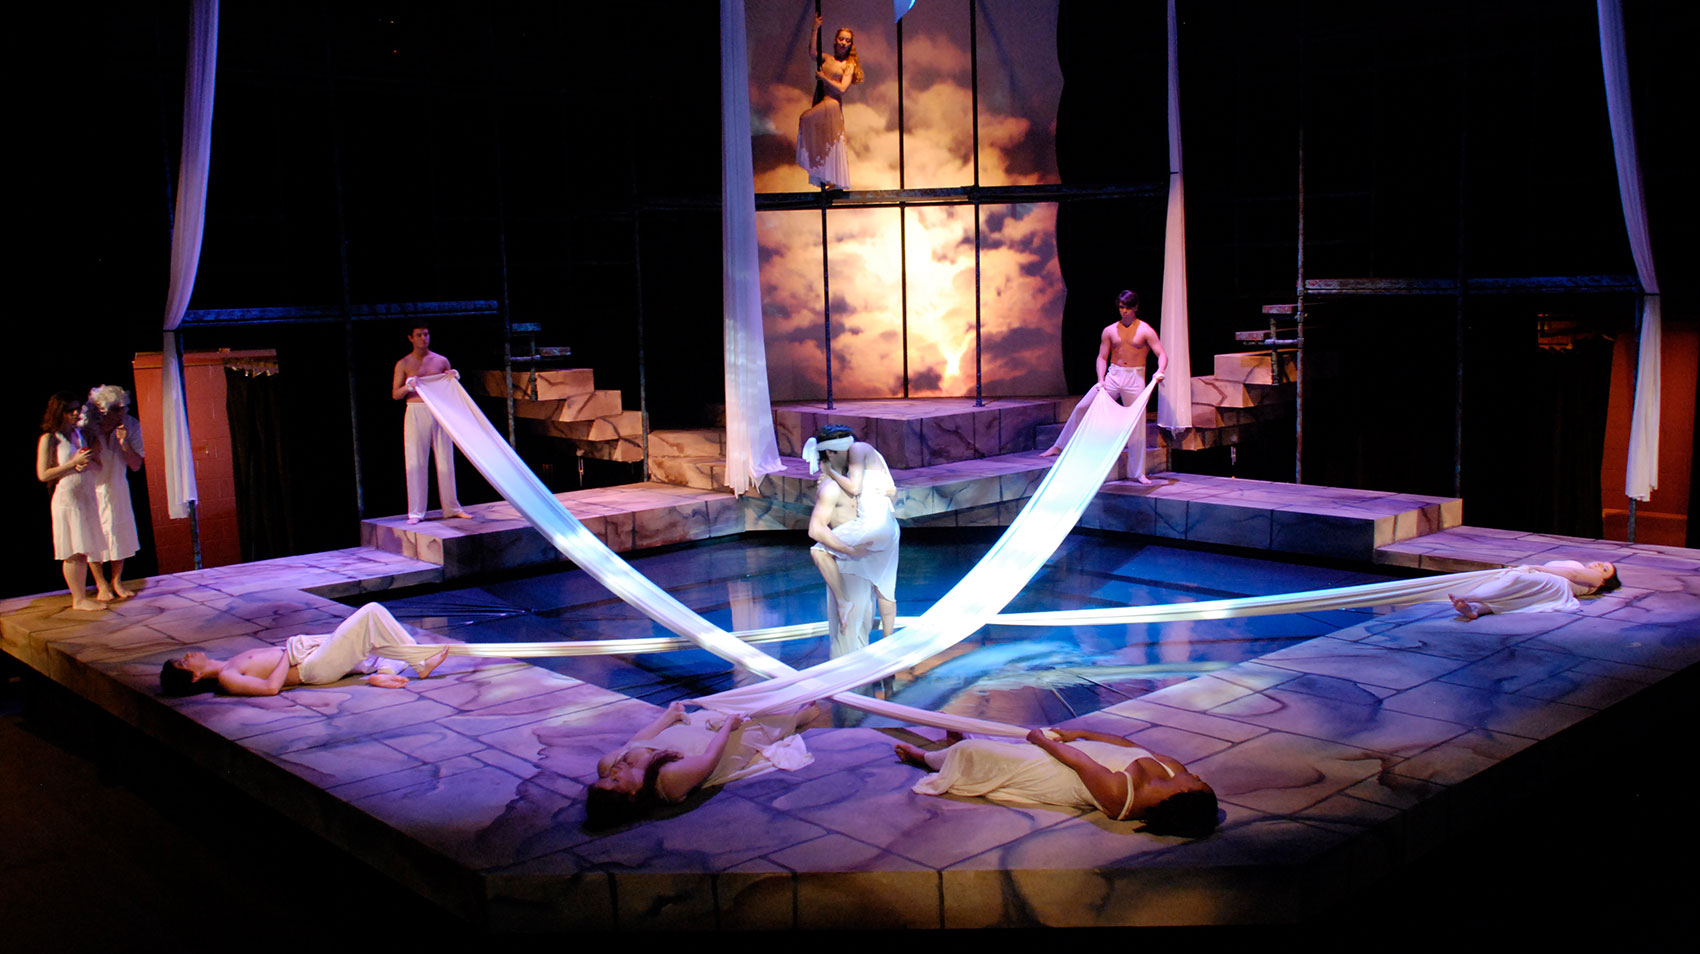 : A blindfolded man presses a woman to him in n embrace by supporting her underneath her leg and her back while she has her arm wrapped around his neck and her head behind his. Characters in white attire surround the couple, six surrounding them by holding white drapes stretched end-to-end across a pool in the middle of the stage. Two women in white watch from the background while one watches from a platform above stage.